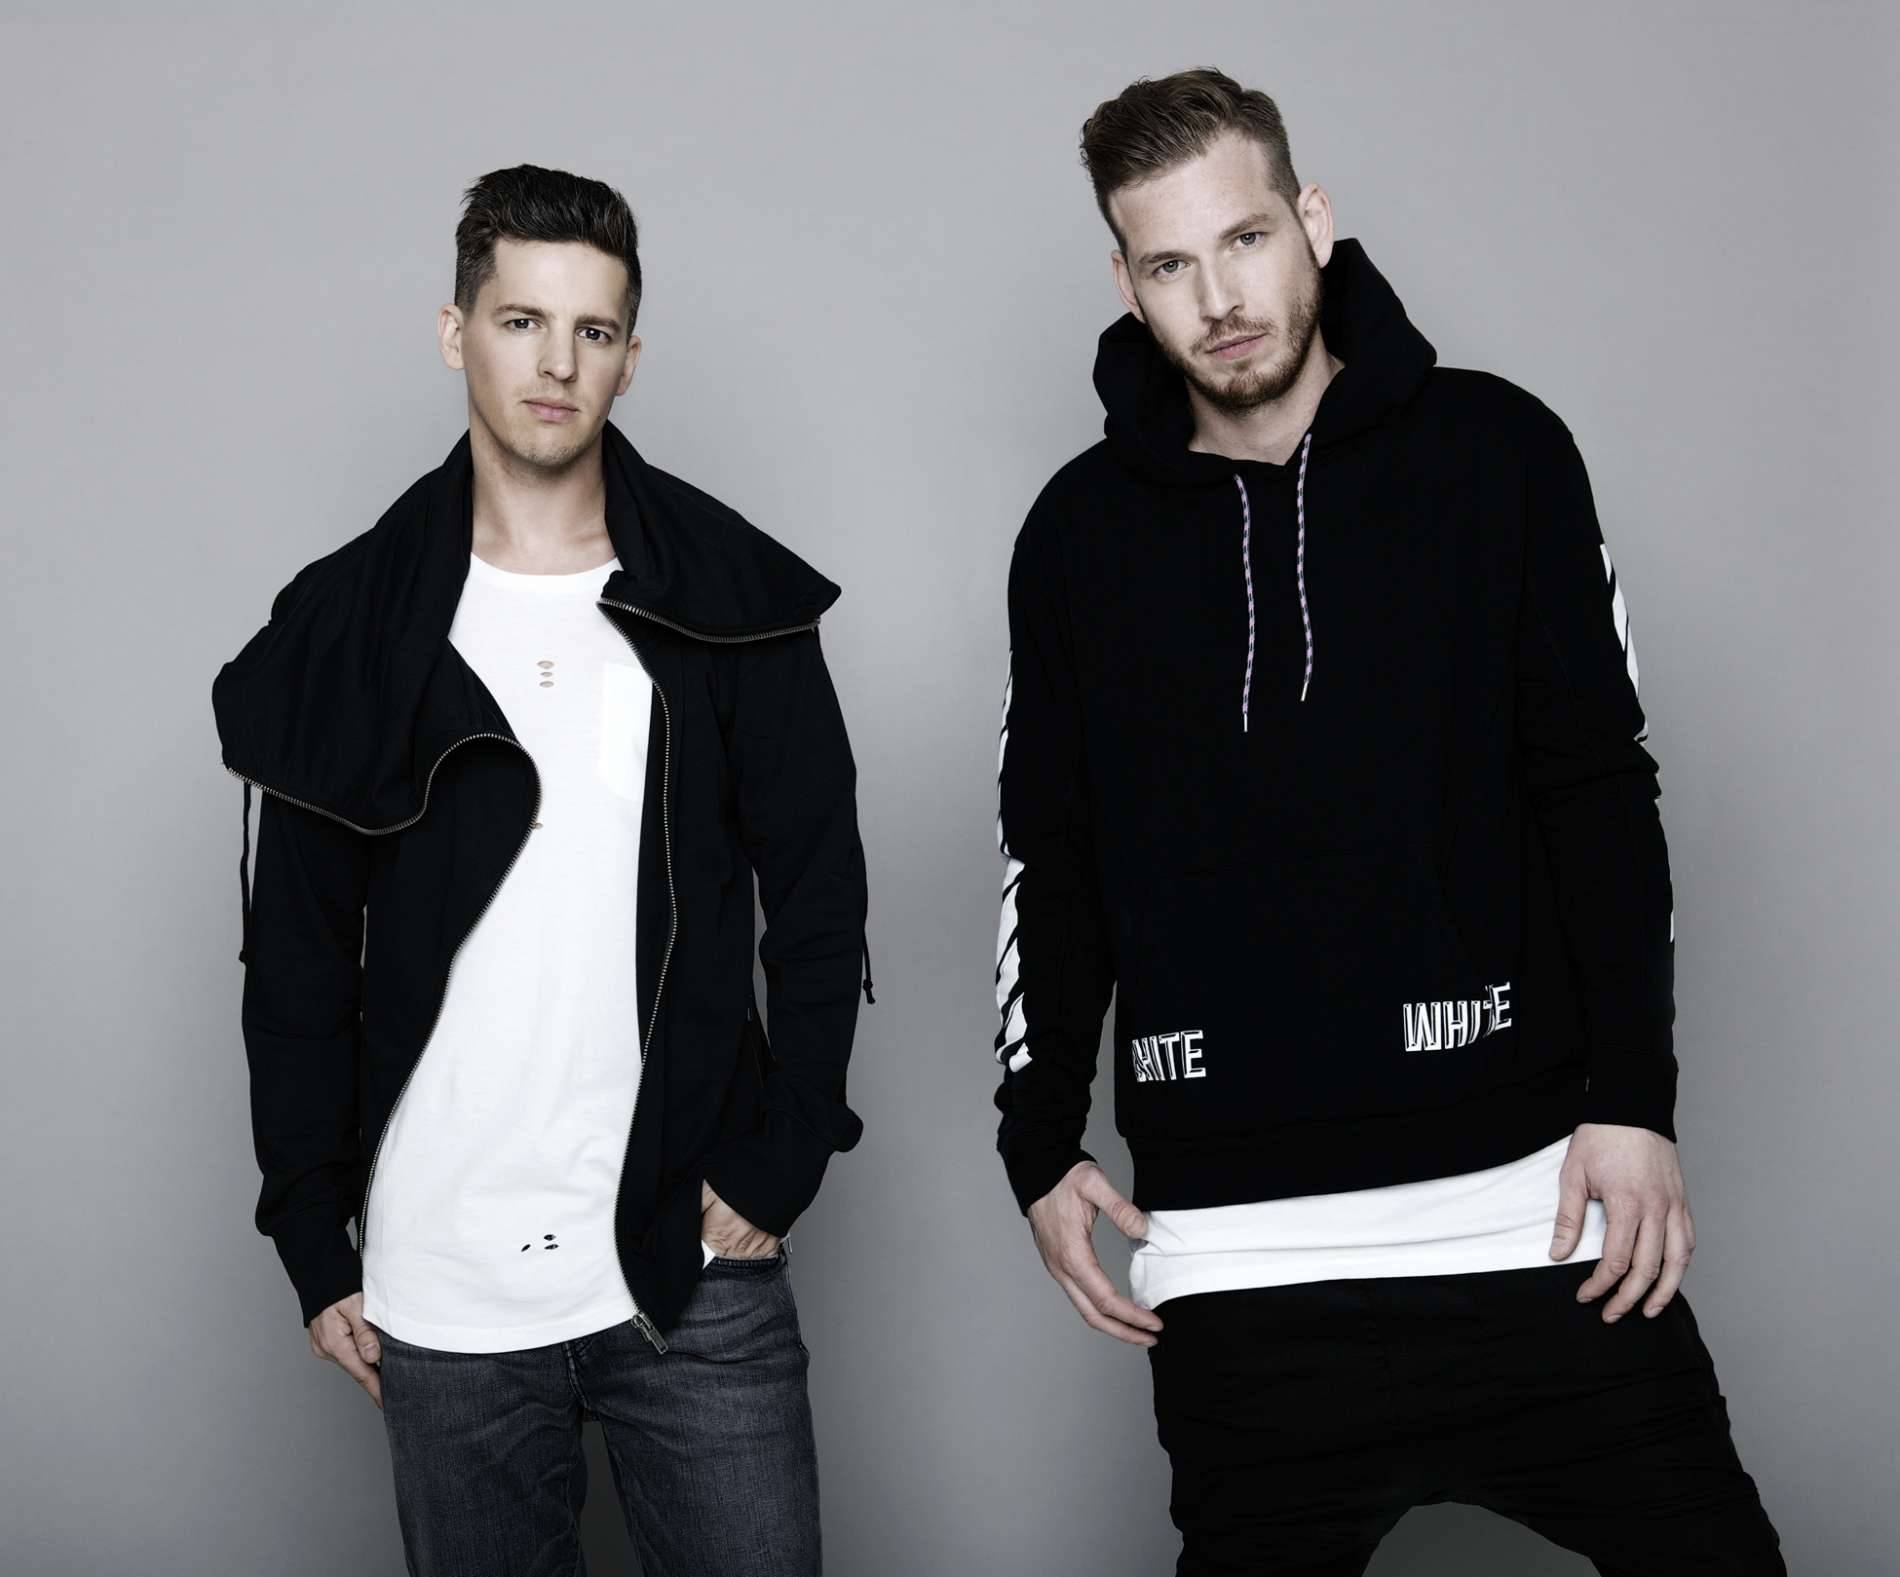 Remix contest launched with classic Firebeatz hit 'Dear New York'